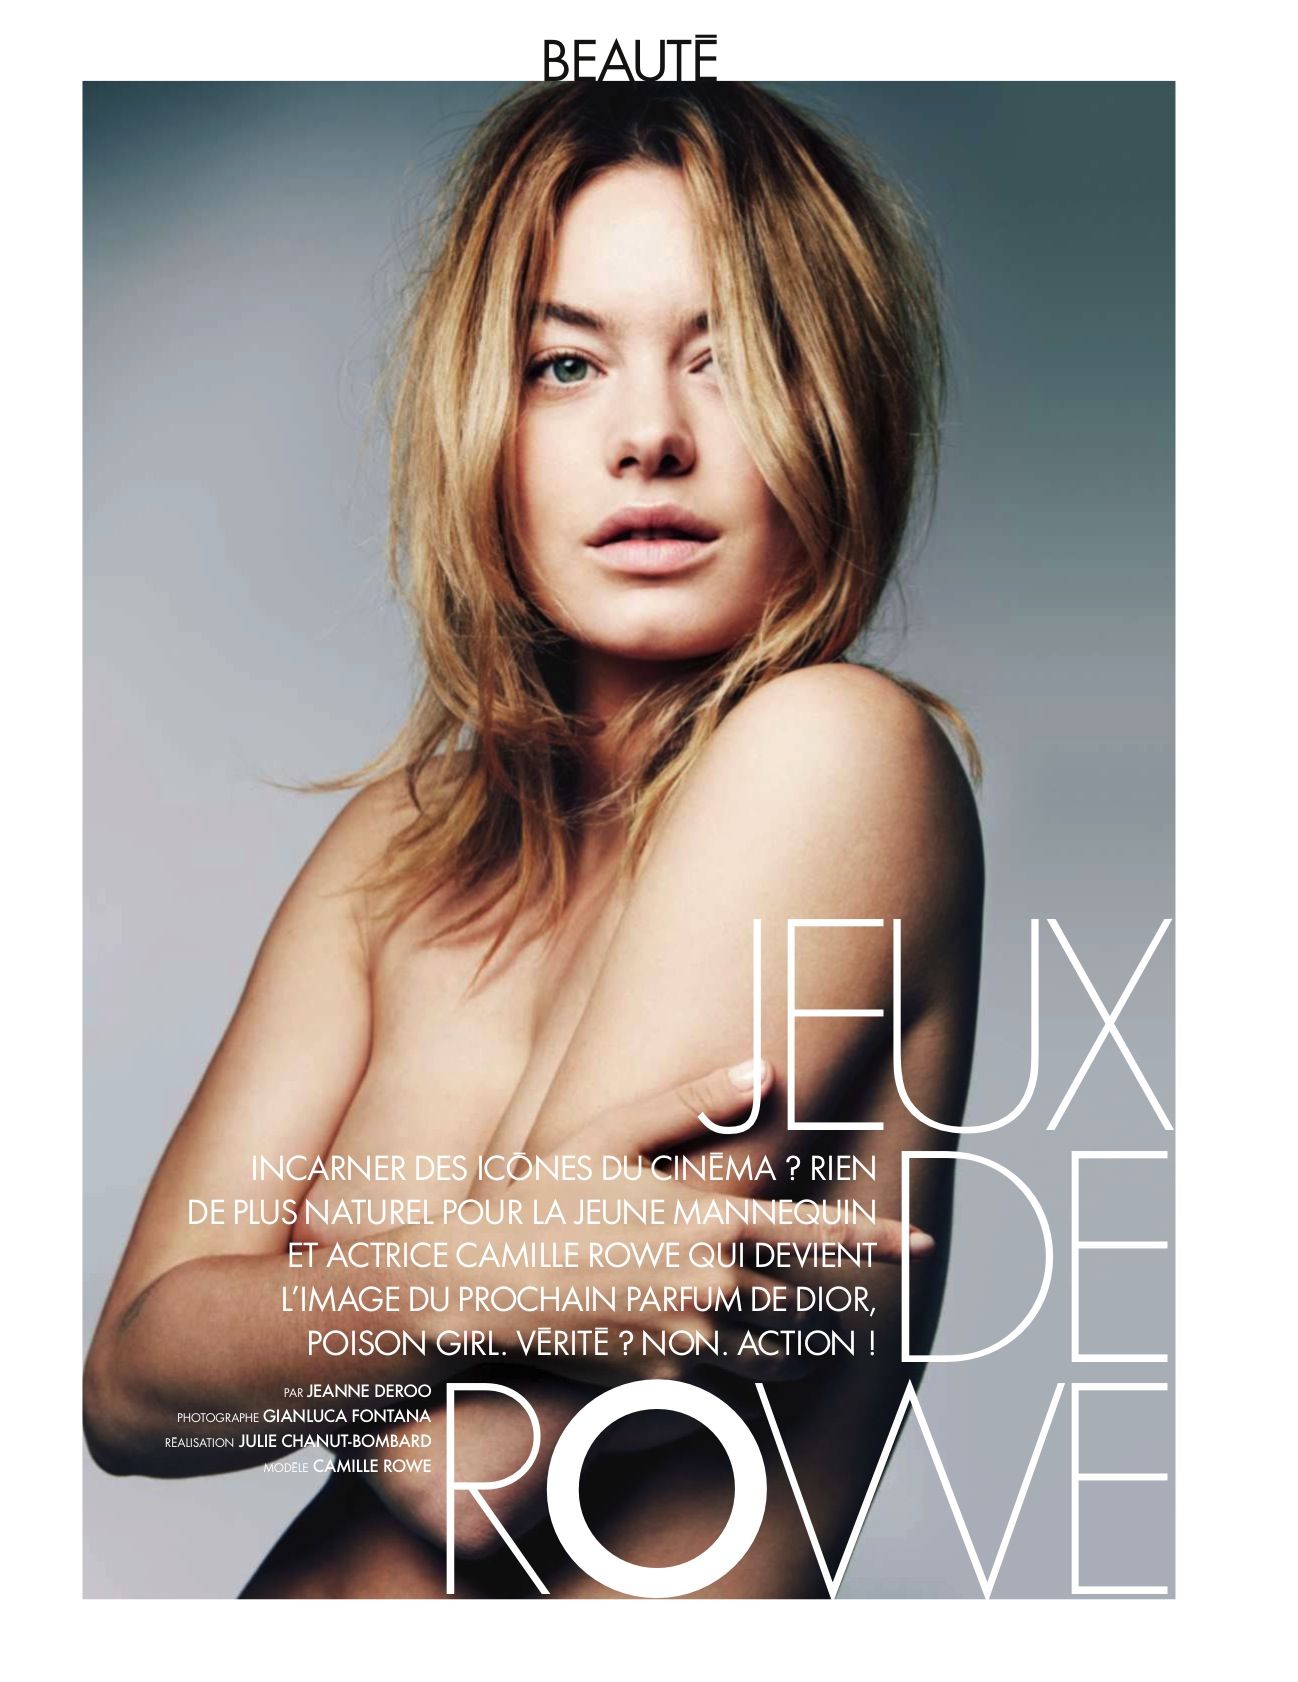 Camille rowe foto topless
 #79647587